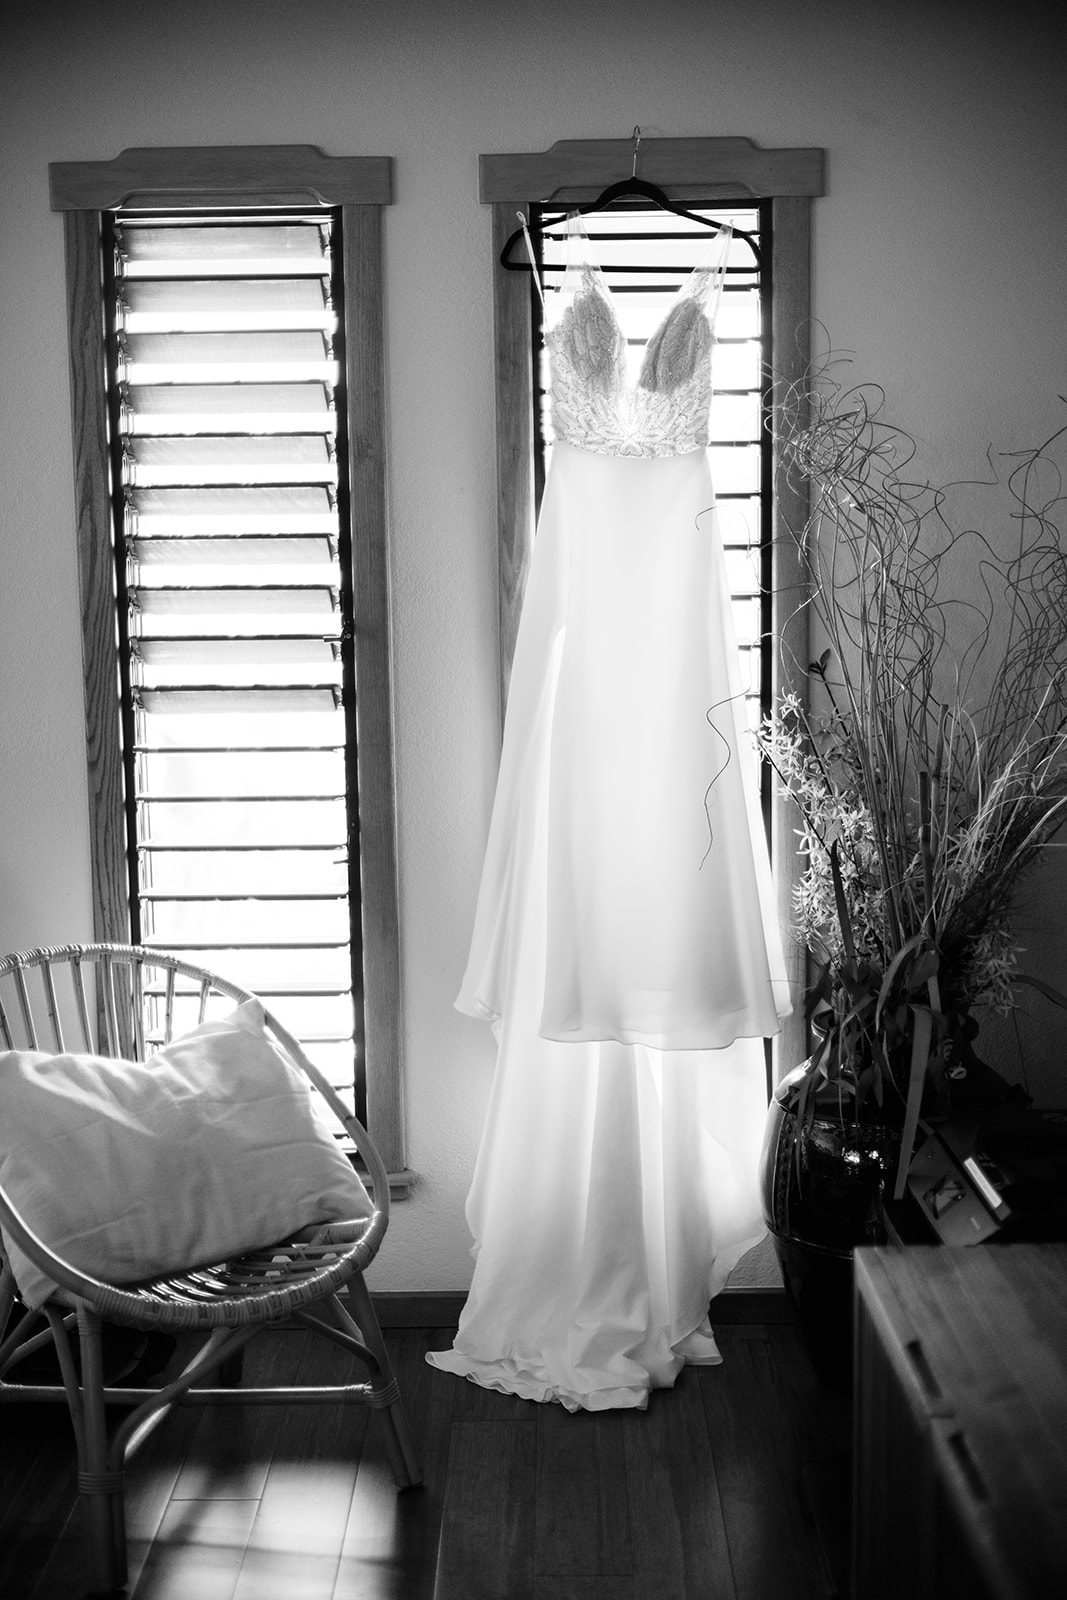 A wedding dress hanging in front of a window, casting a silhouette against the light filtering through blinds.